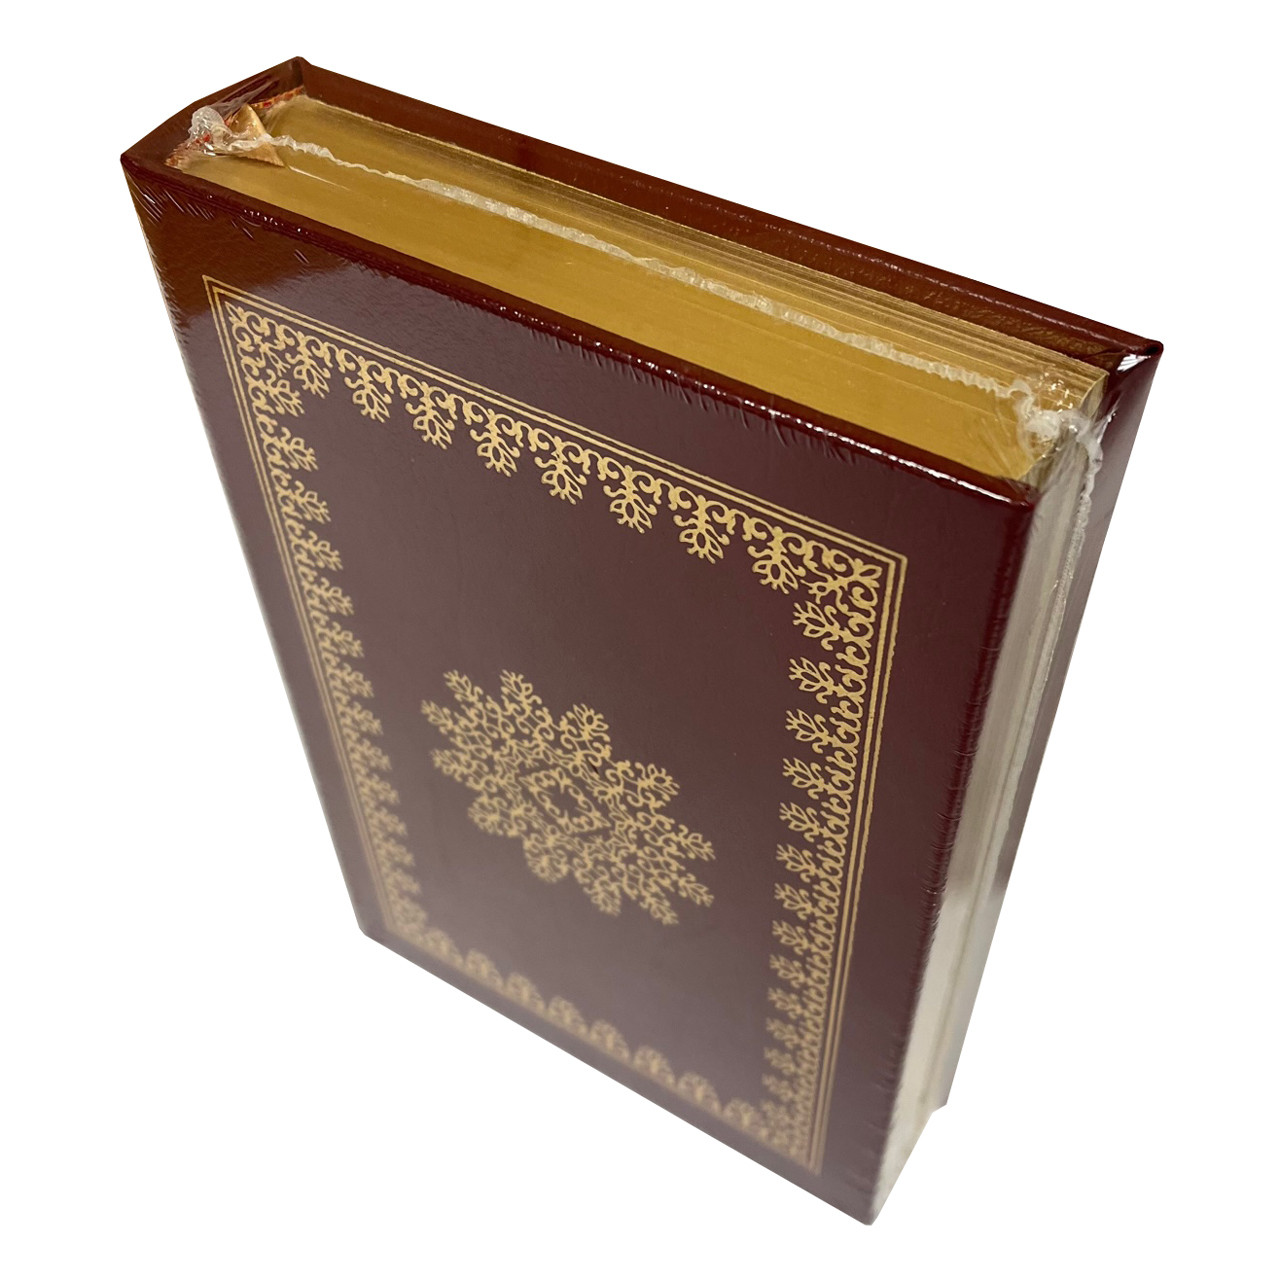 Barbara Bush "Reflections" Signed First Edition, Leather Bound Collector's Edition w/COA [Sealed]